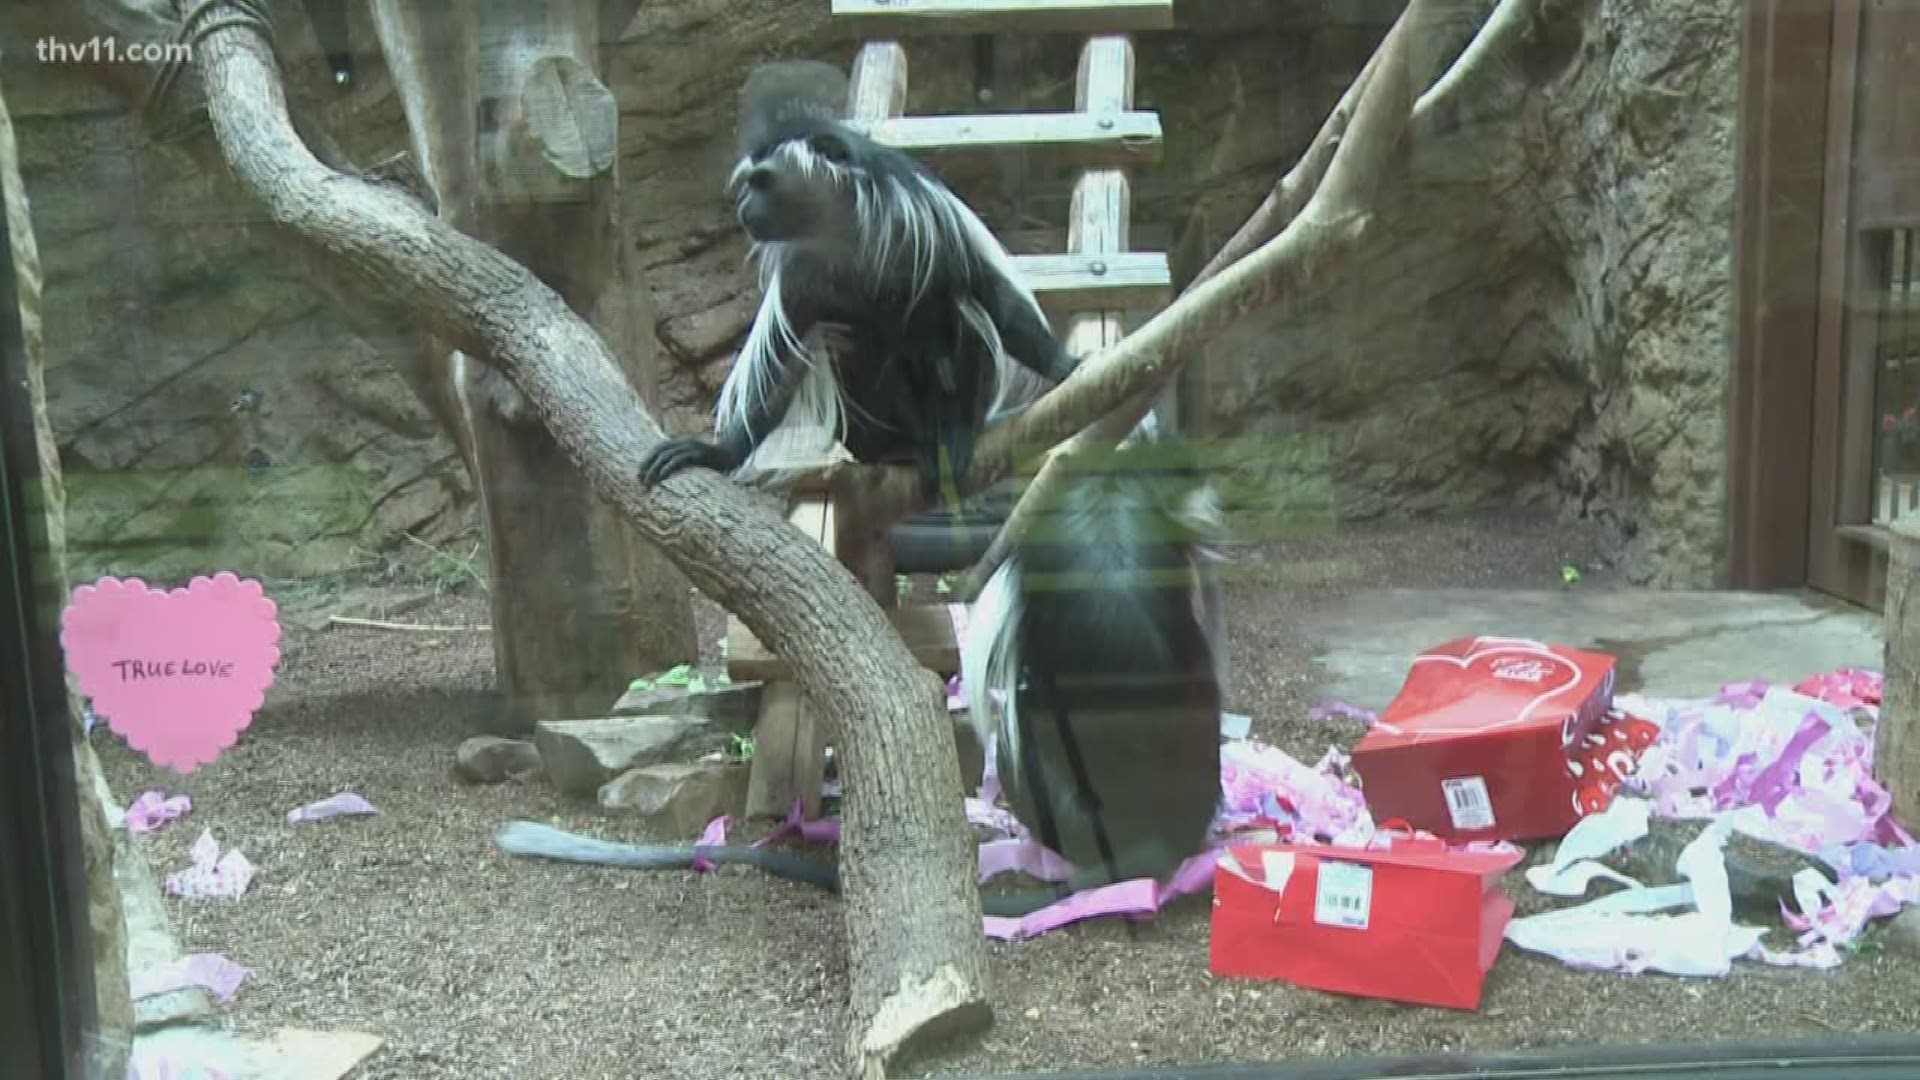 Valentine's Day may be over, but the animals at the little rock zoo are still feeling the love.